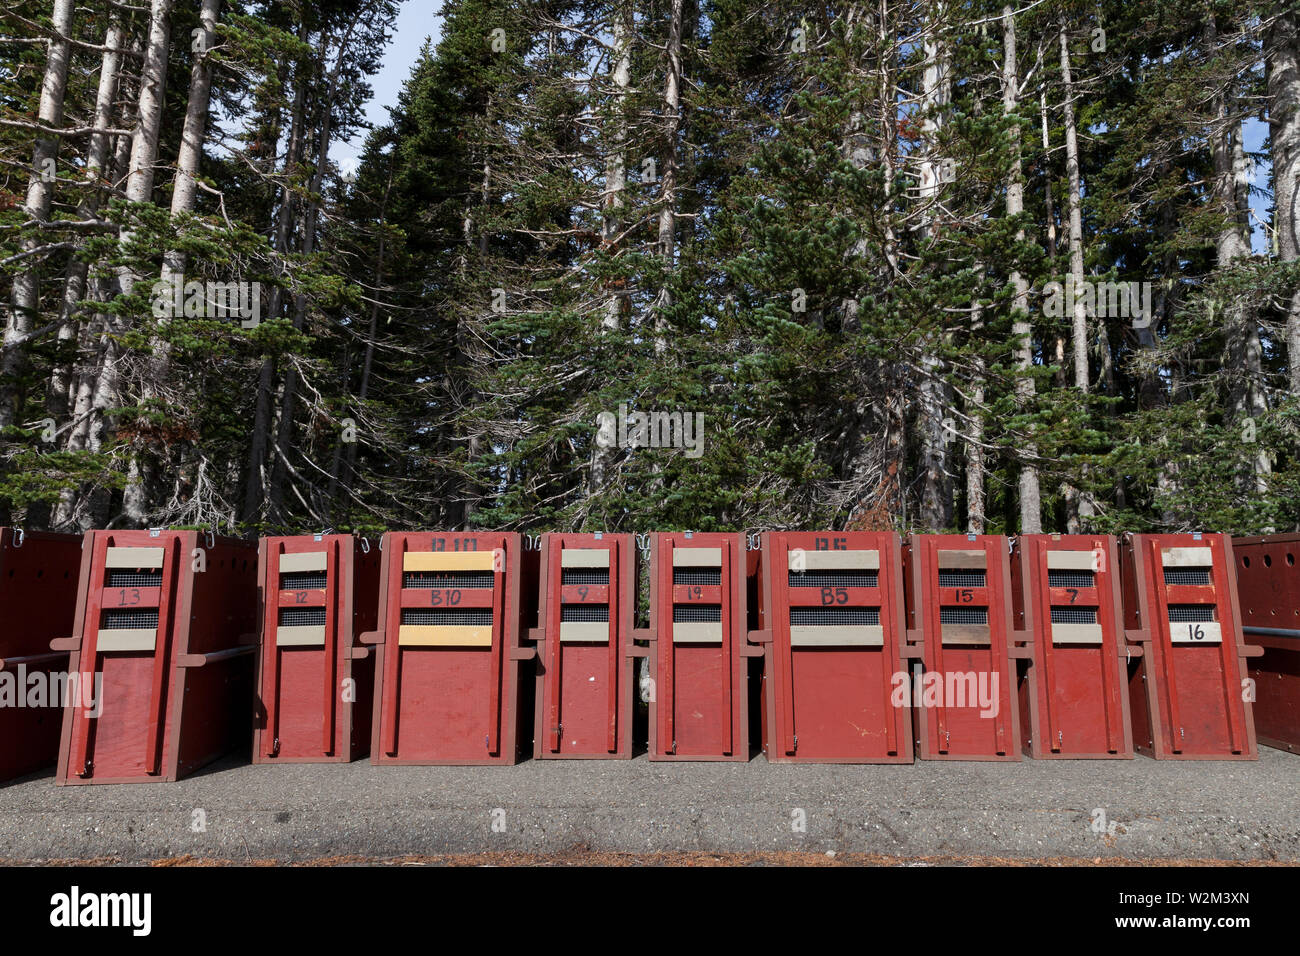 Empty crates lined up at the staging area await the arrival of tranquilized mountain goats at Hurricane Ridge in Olympic National Park, Washington on July 9, 2019. Today is the second day of a two-week long capture and translocation process moving mountain goats from Olympic National Park to the northern Cascade Mountains. The effort is a collaboration between the National Park Service, the Washington Department of Fish & Wildlife and the USDA Forest Service to re-establish depleted populations of mountain goats in the Northern Cascades while also removing non-native goats from the Olympic Mou Stock Photo